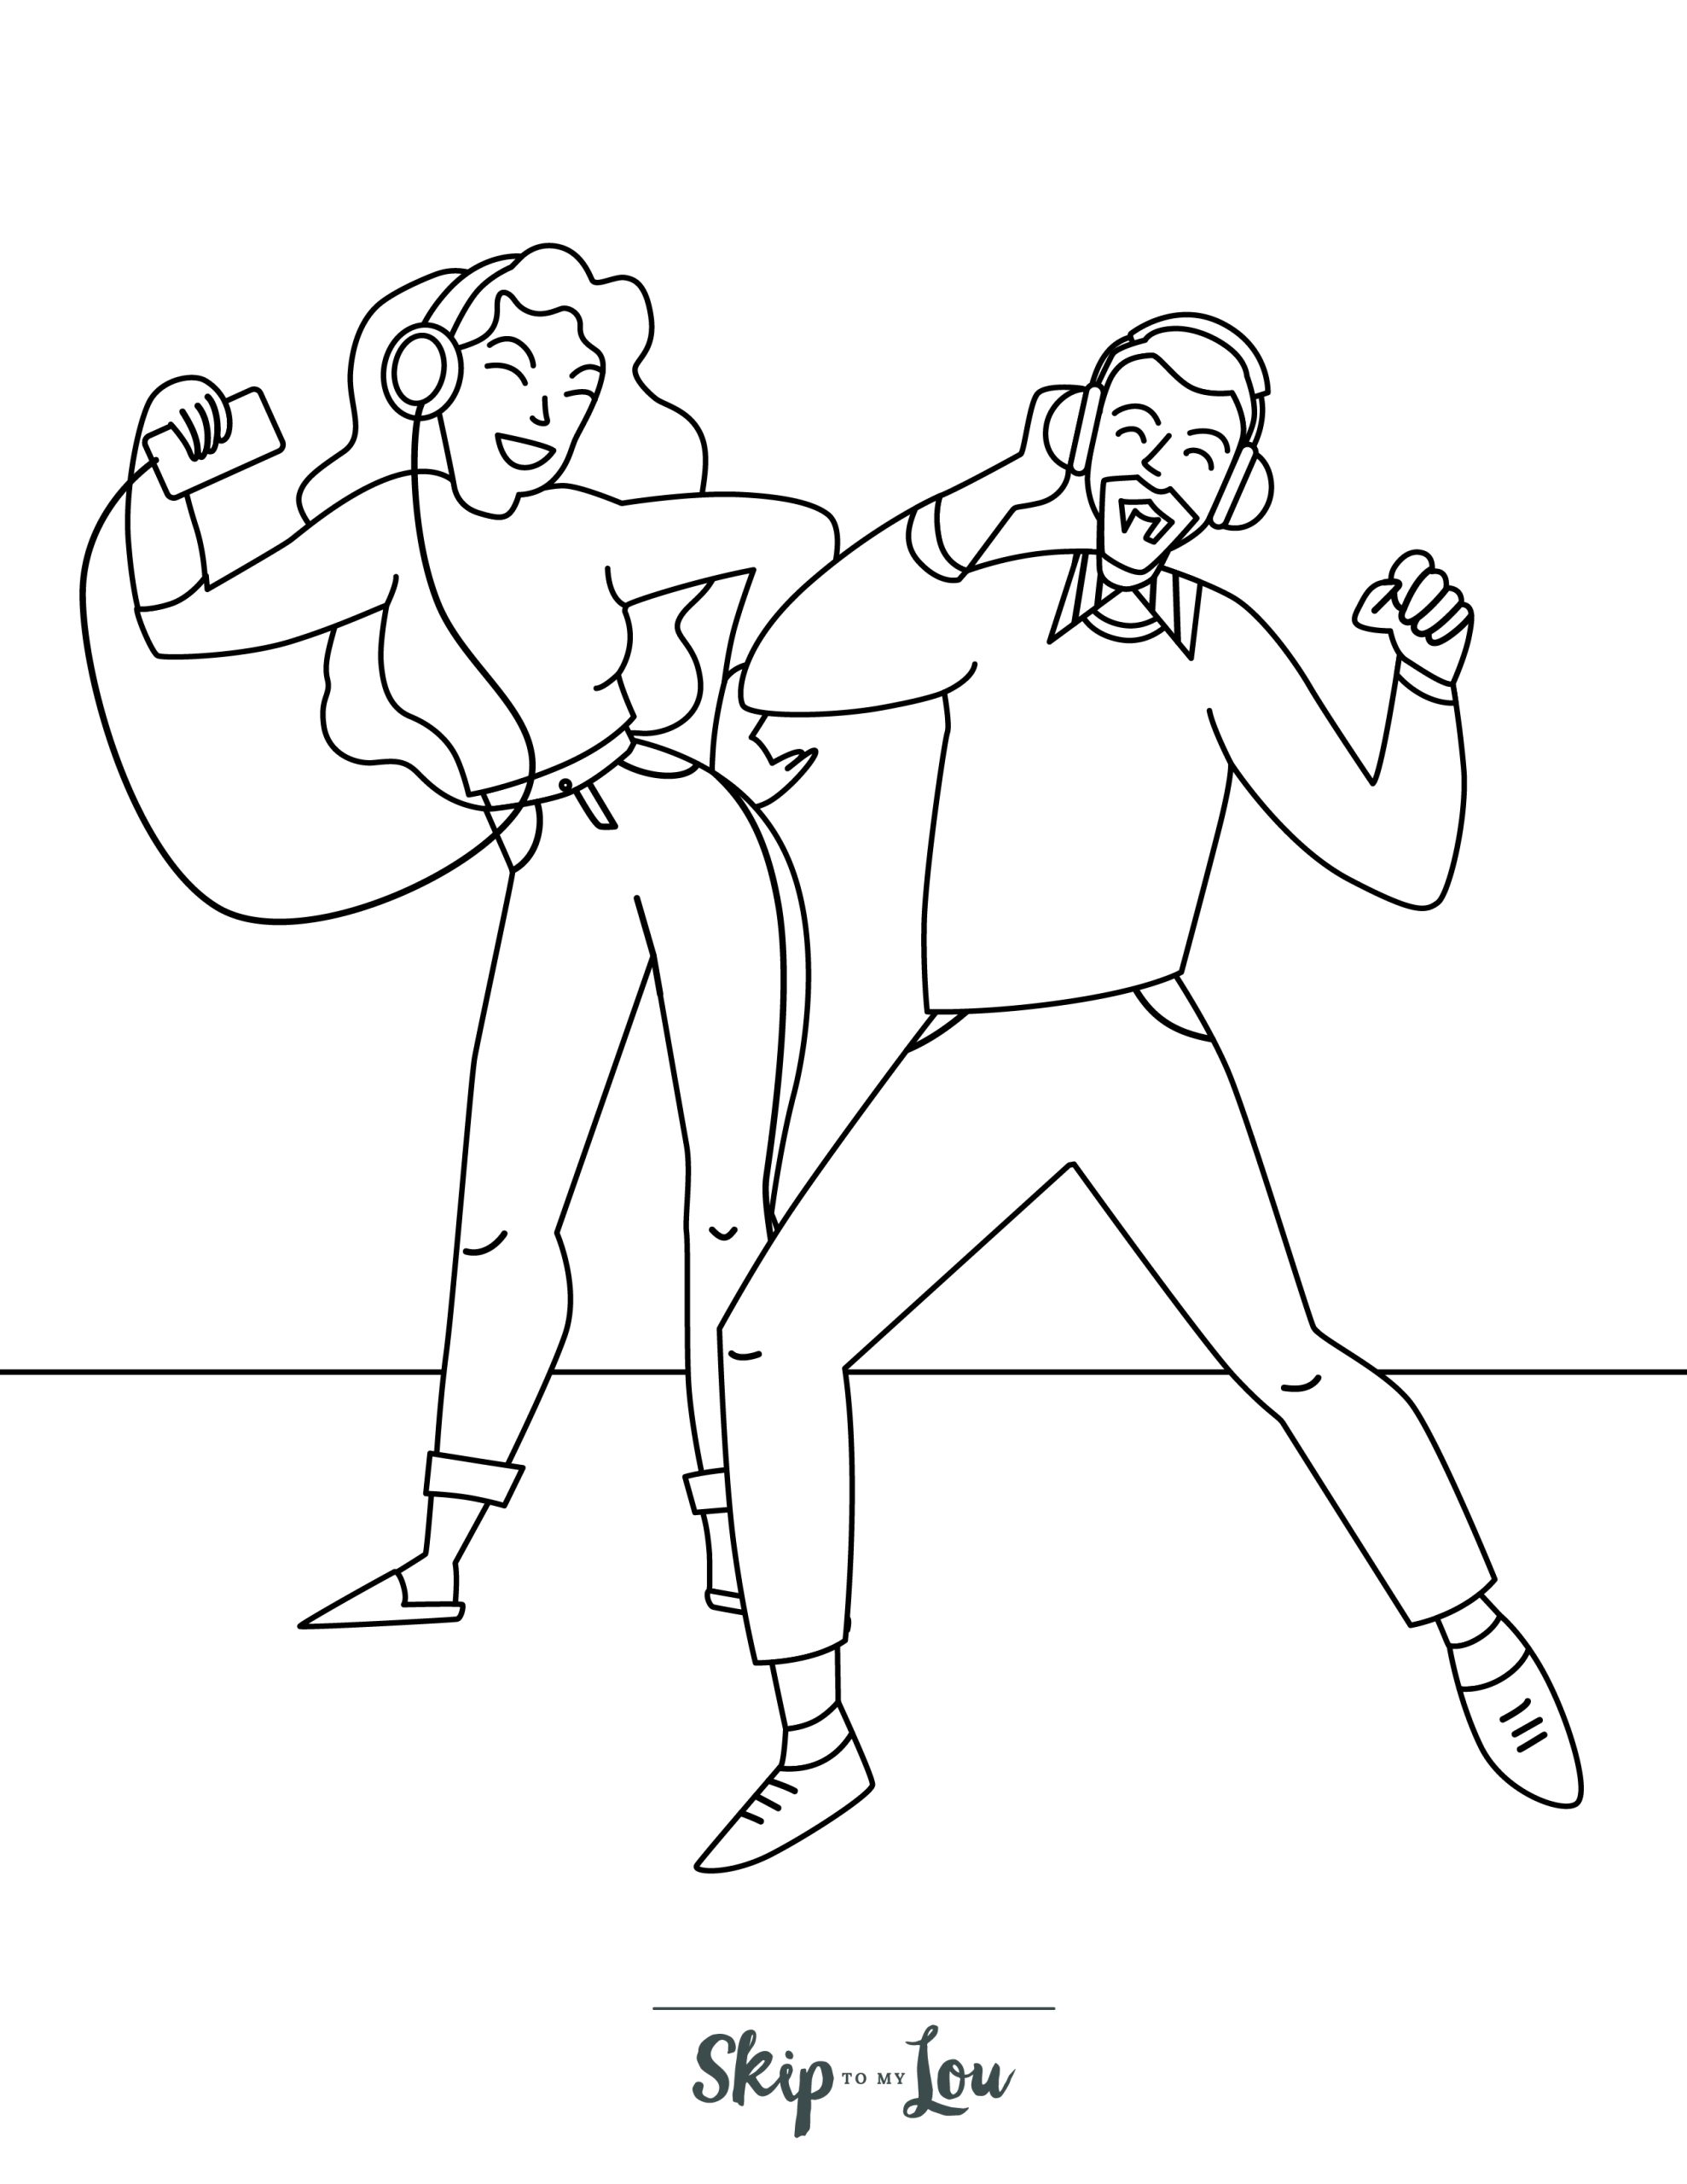 People Coloring Page 10 - Line drawing of dancing people listening to music